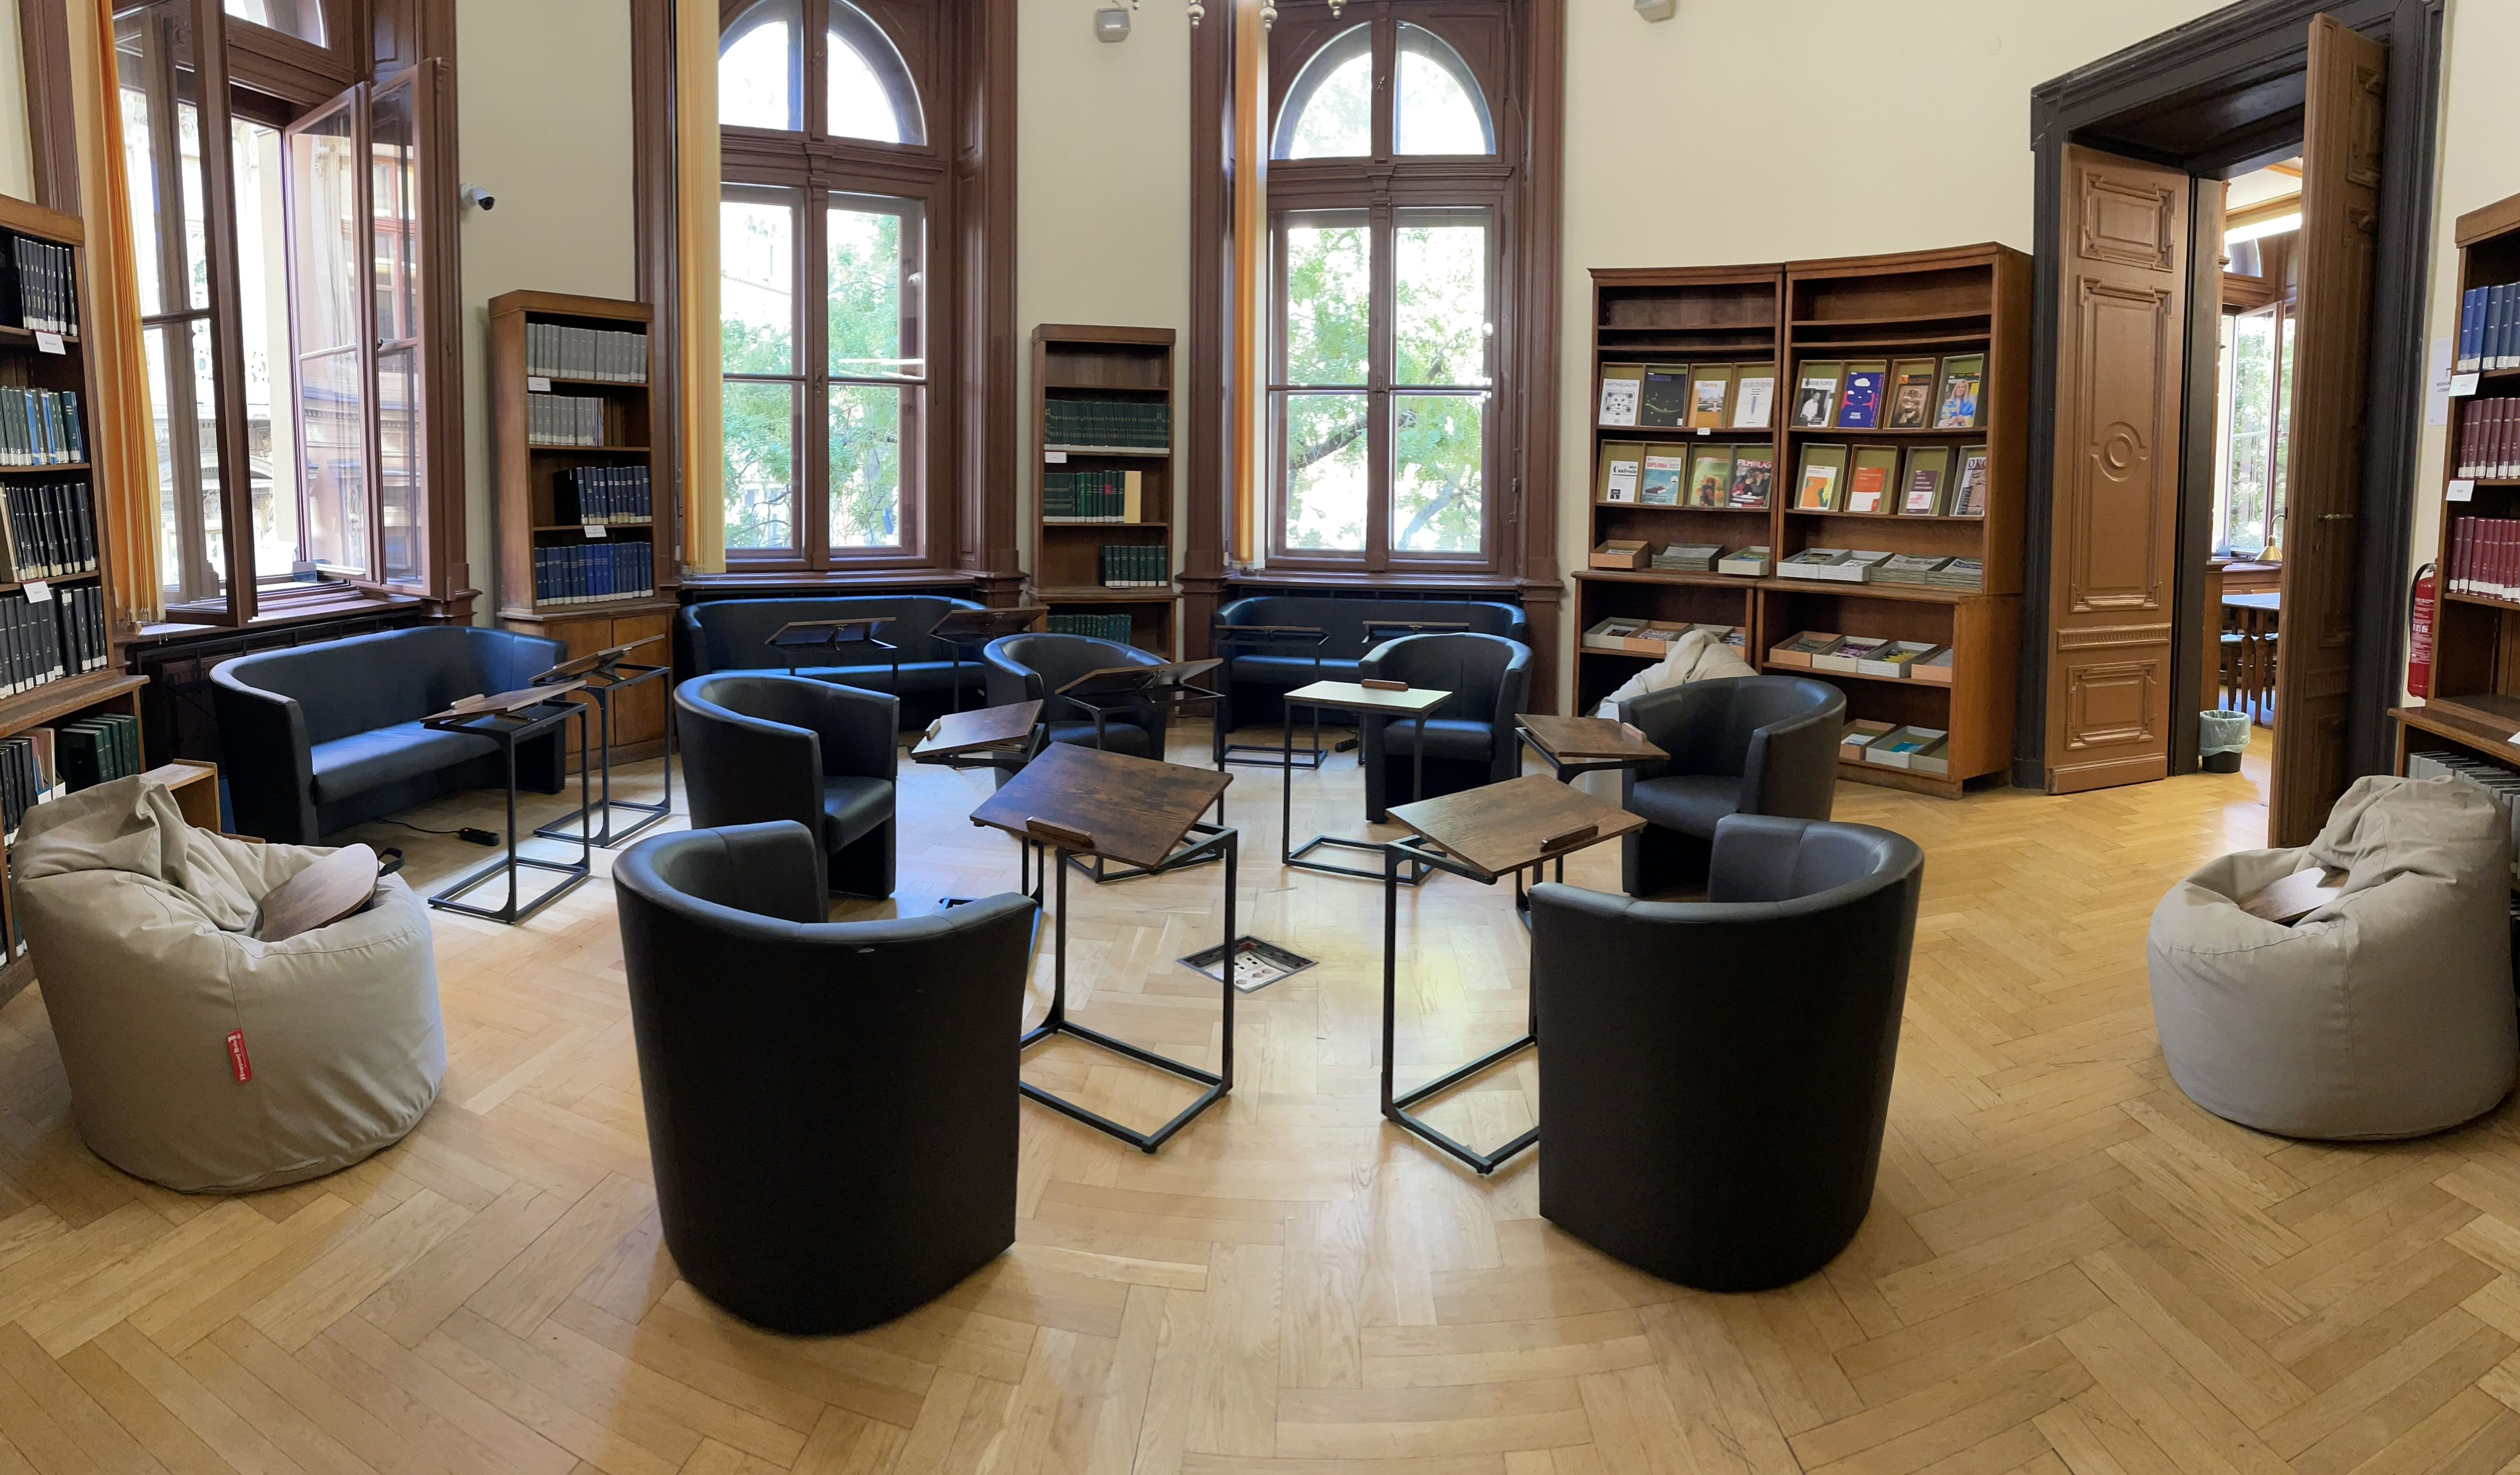 New community space in the University Library and Archives